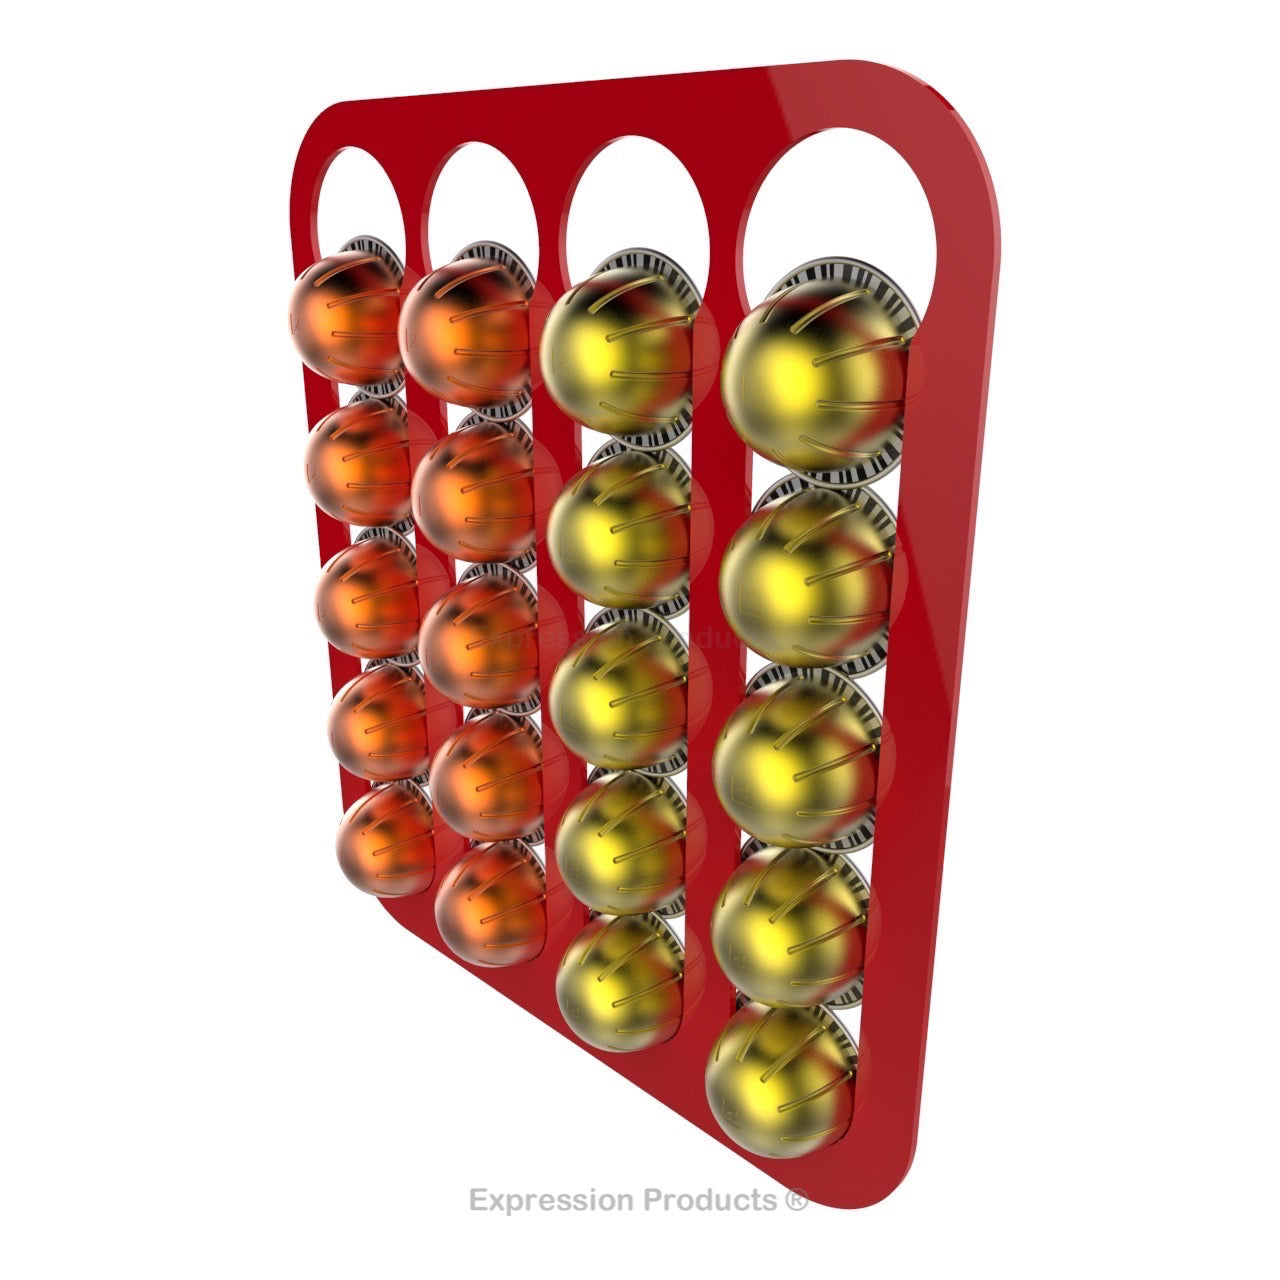 Magnetic Nespresso Vertuo capsule holder shown in red holding 20 pods